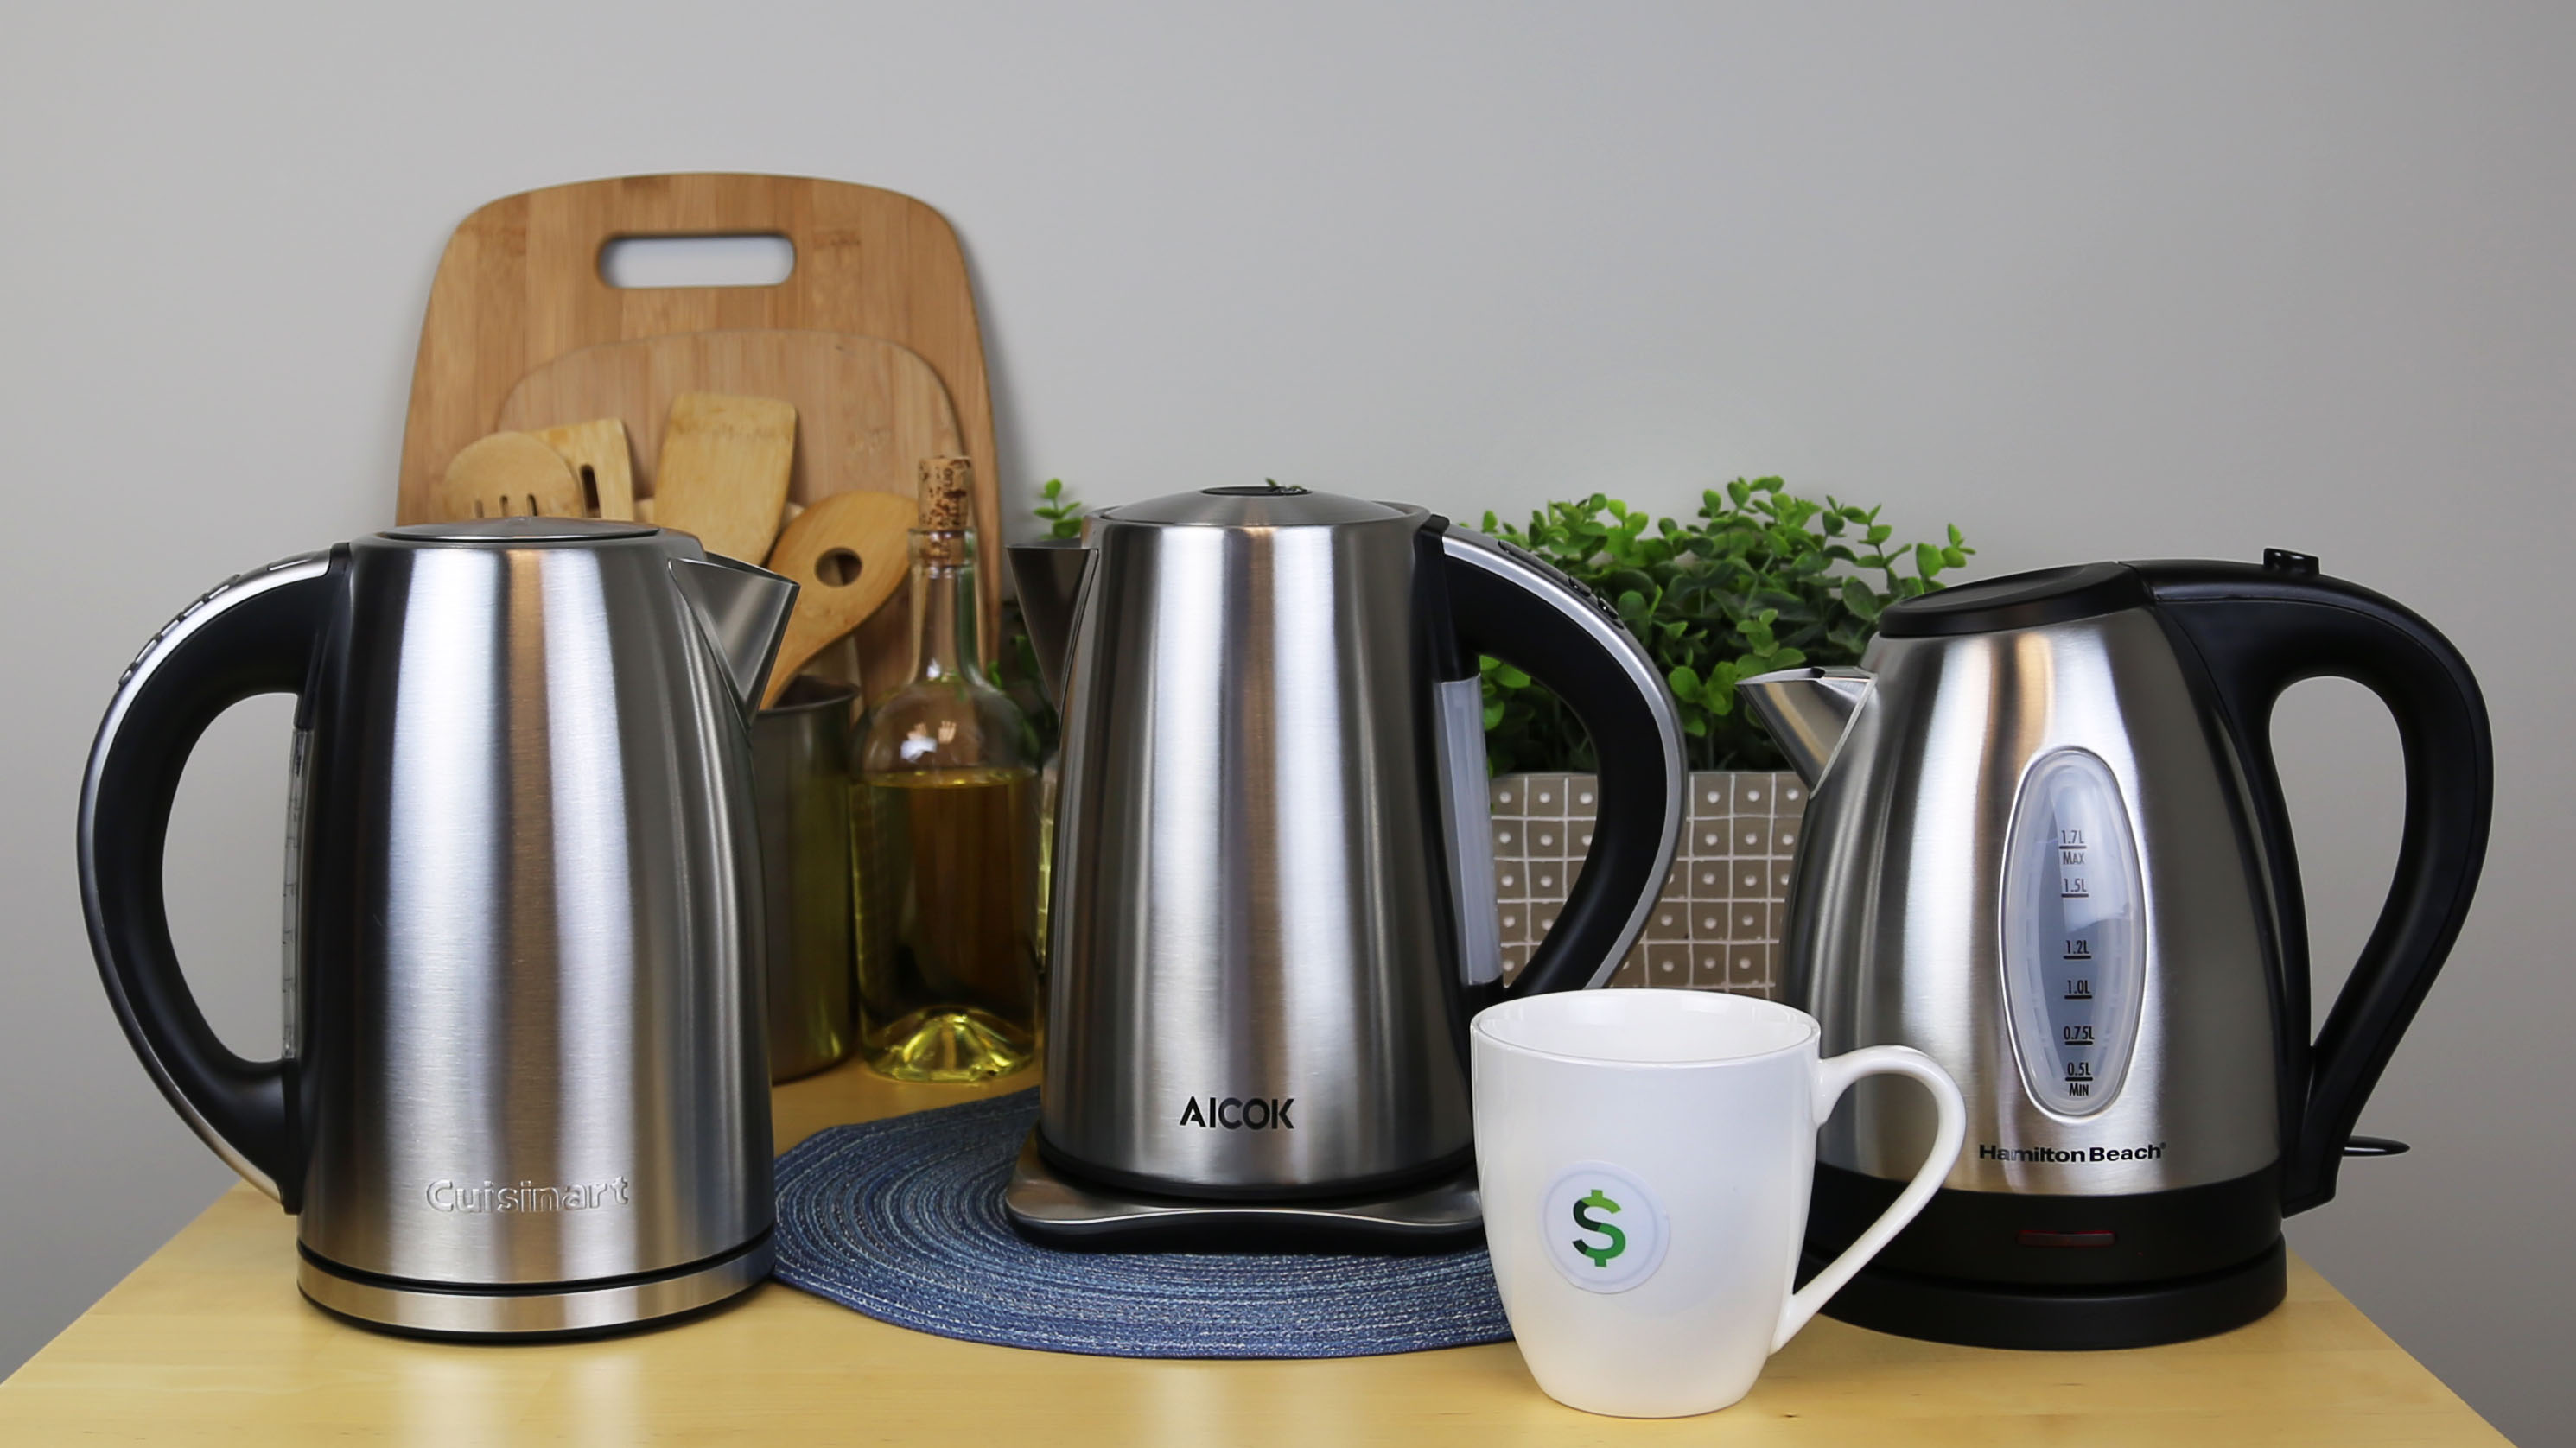 https://www.dontwasteyourmoney.com/wp-content/uploads/2019/07/electric-kettle-all-review-forte-dwym.jpg